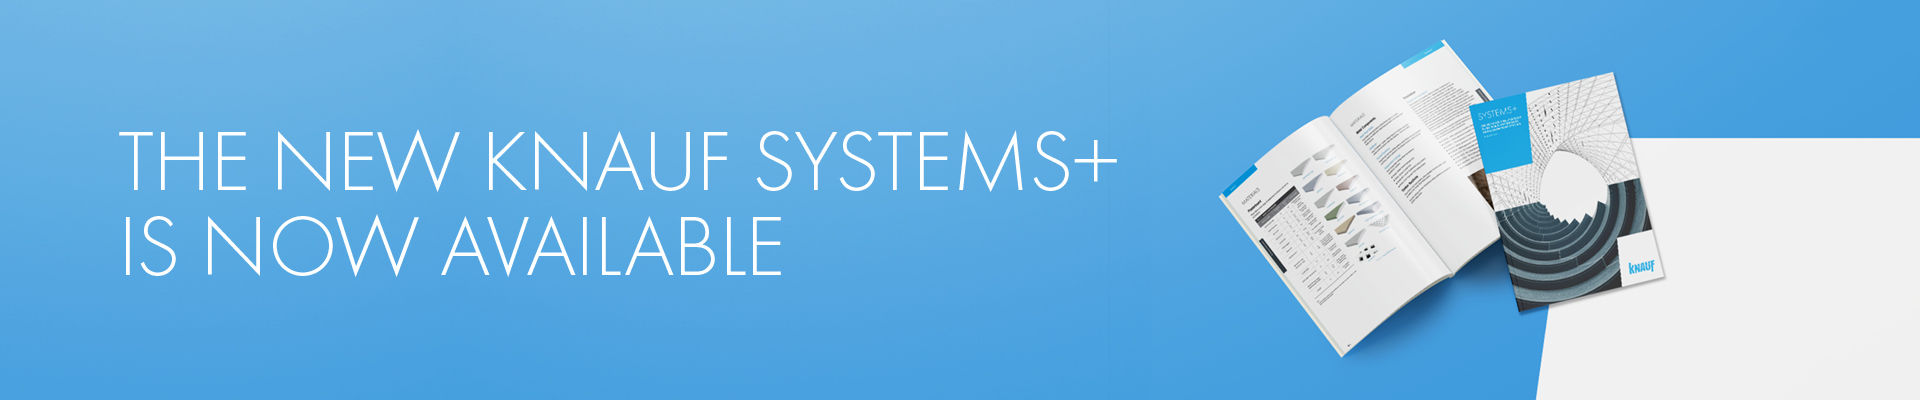 Systems+ What's New Banner Image 1920x400